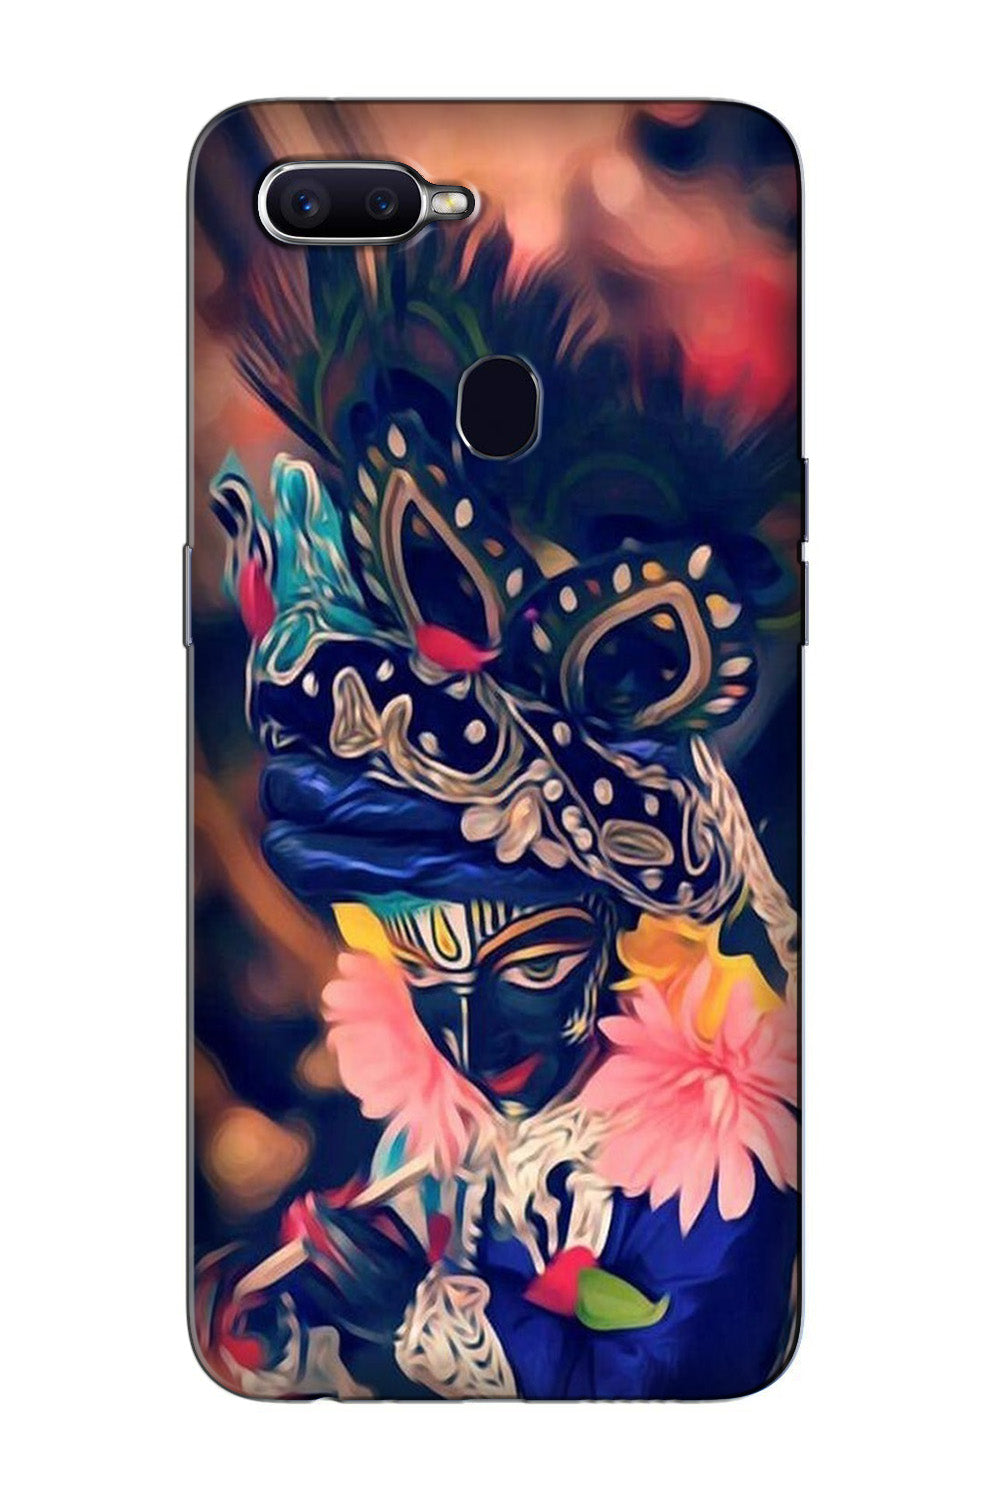 Lord Krishna Case for Oppo F9 Pro